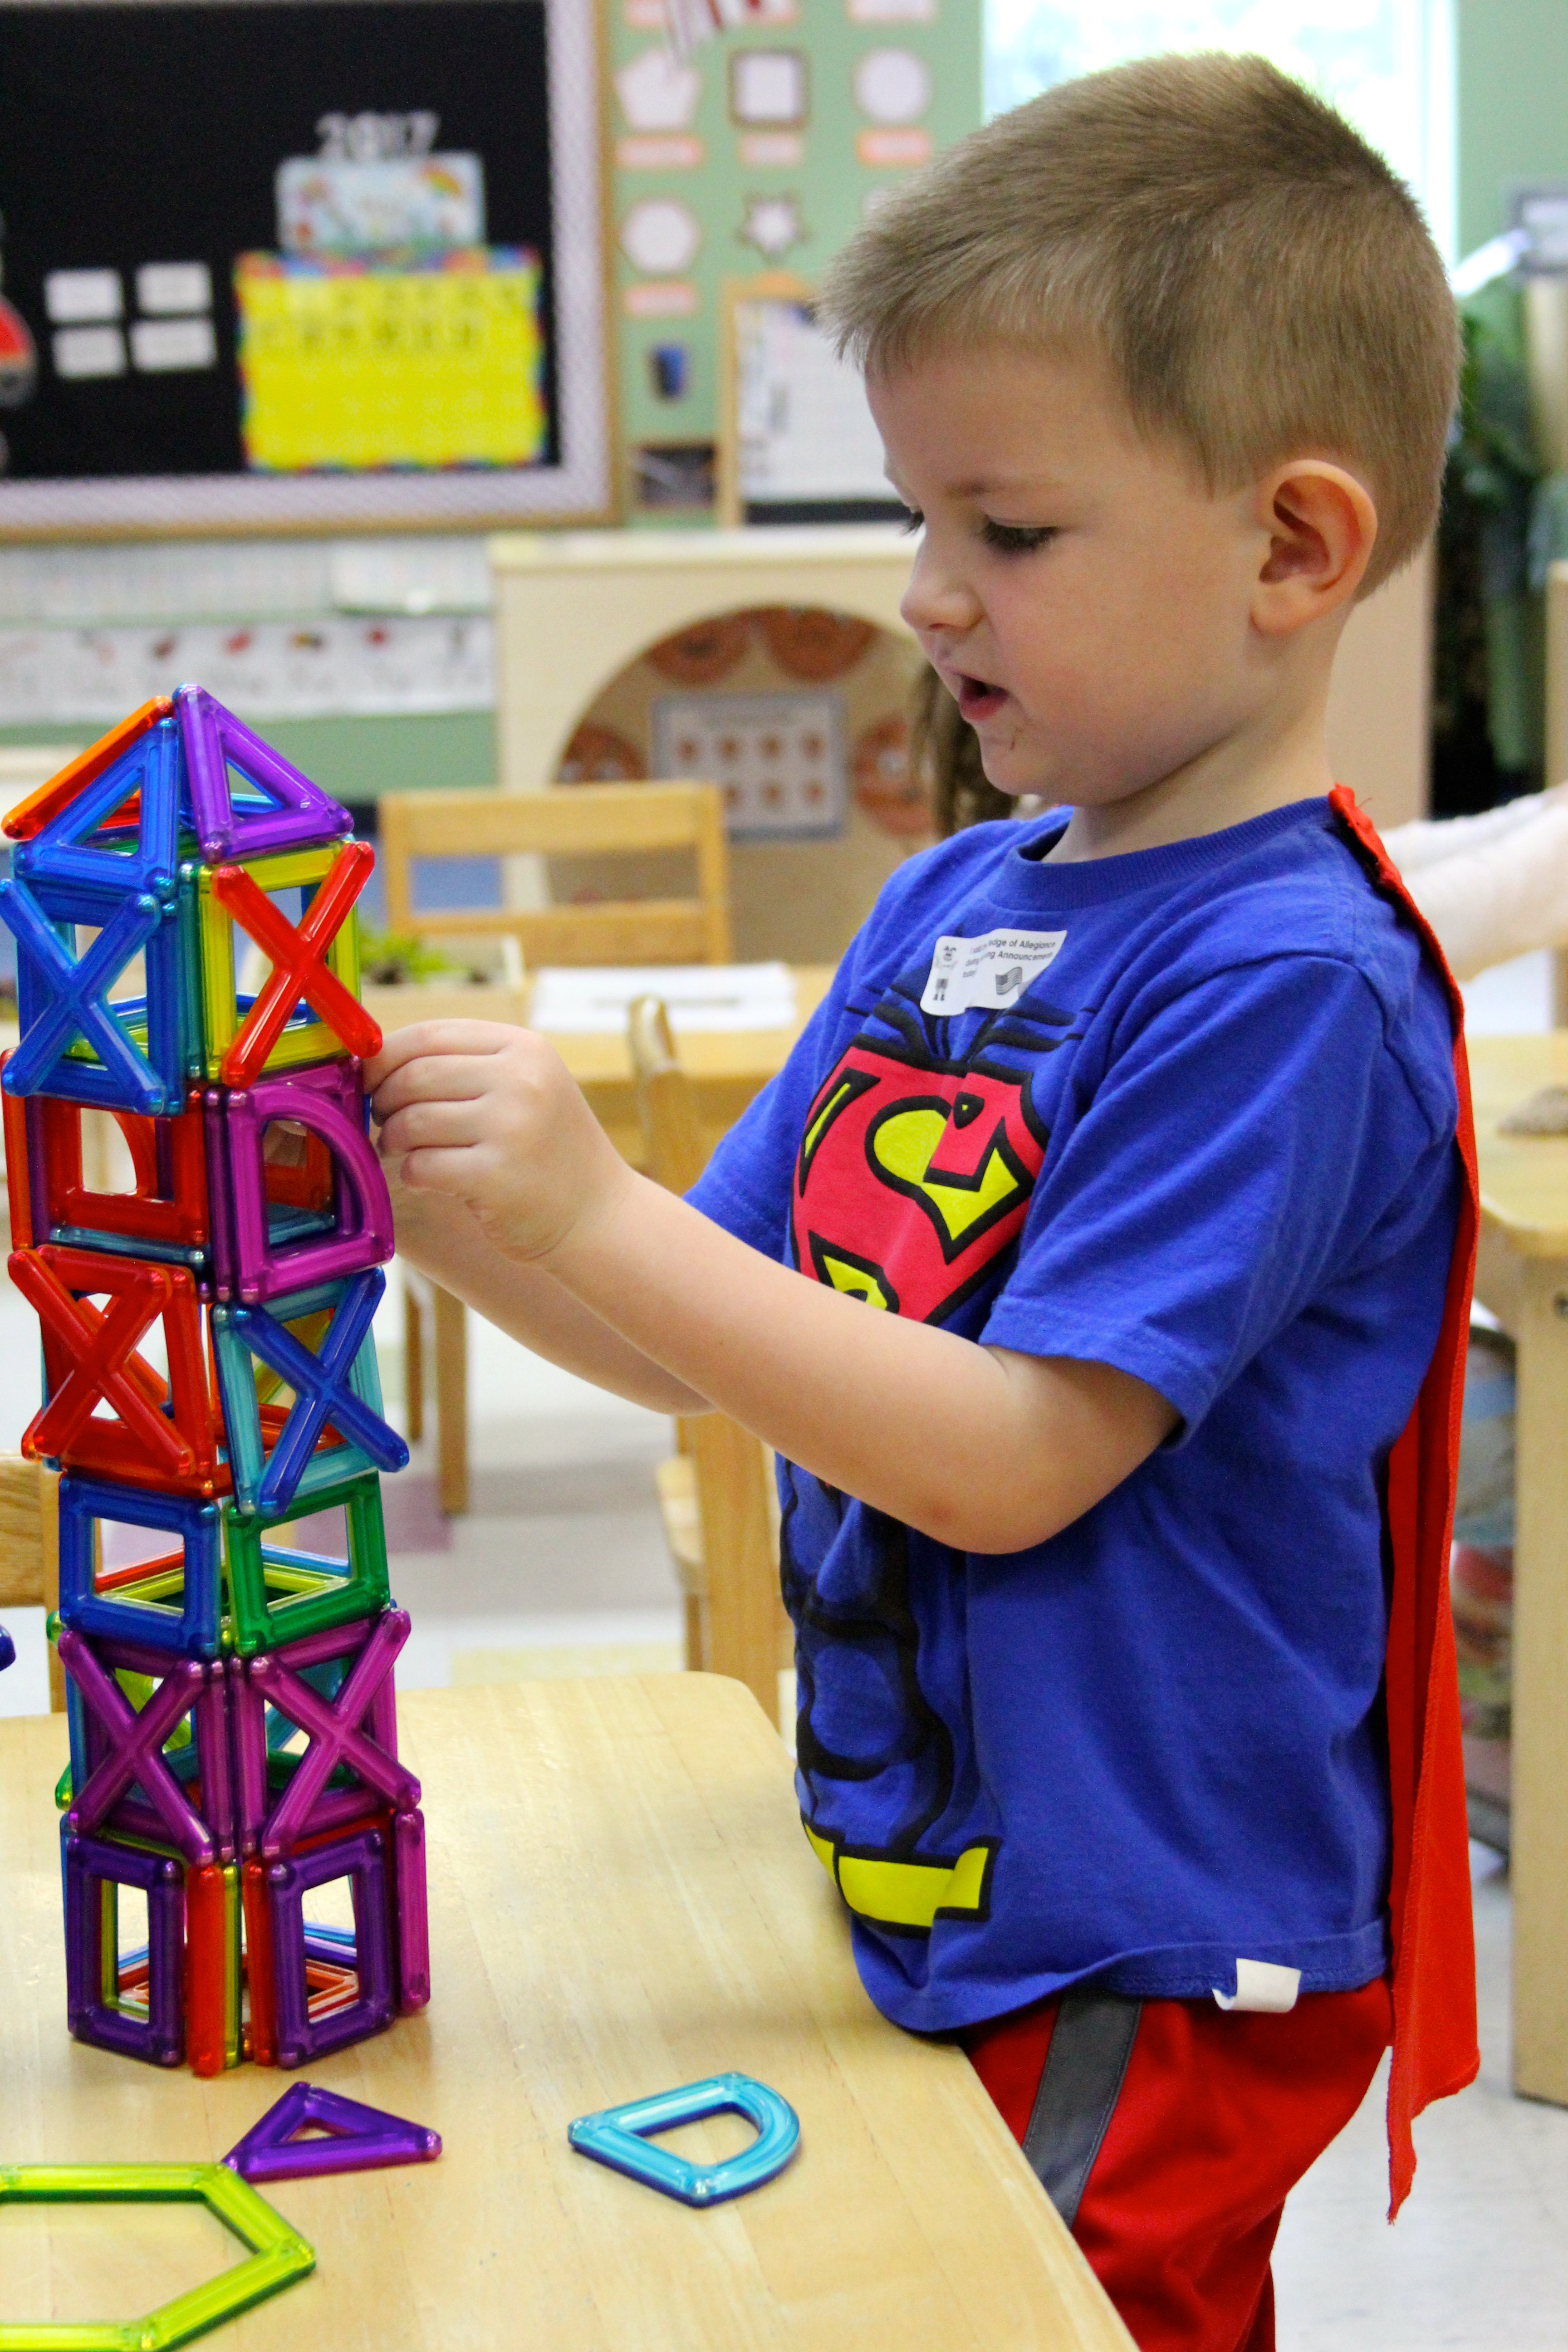 a boy building a toy tower